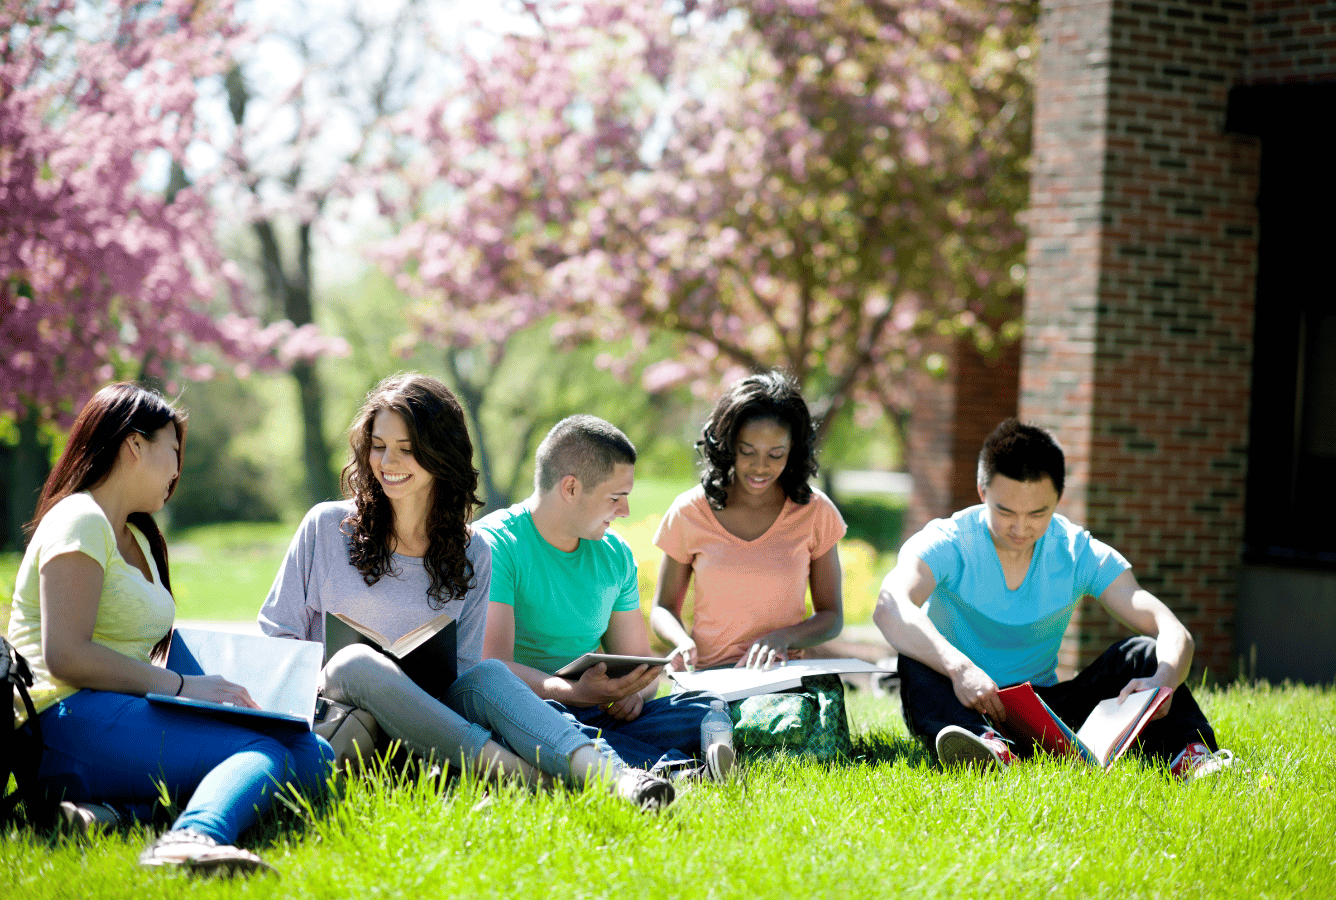 Students studying on grass